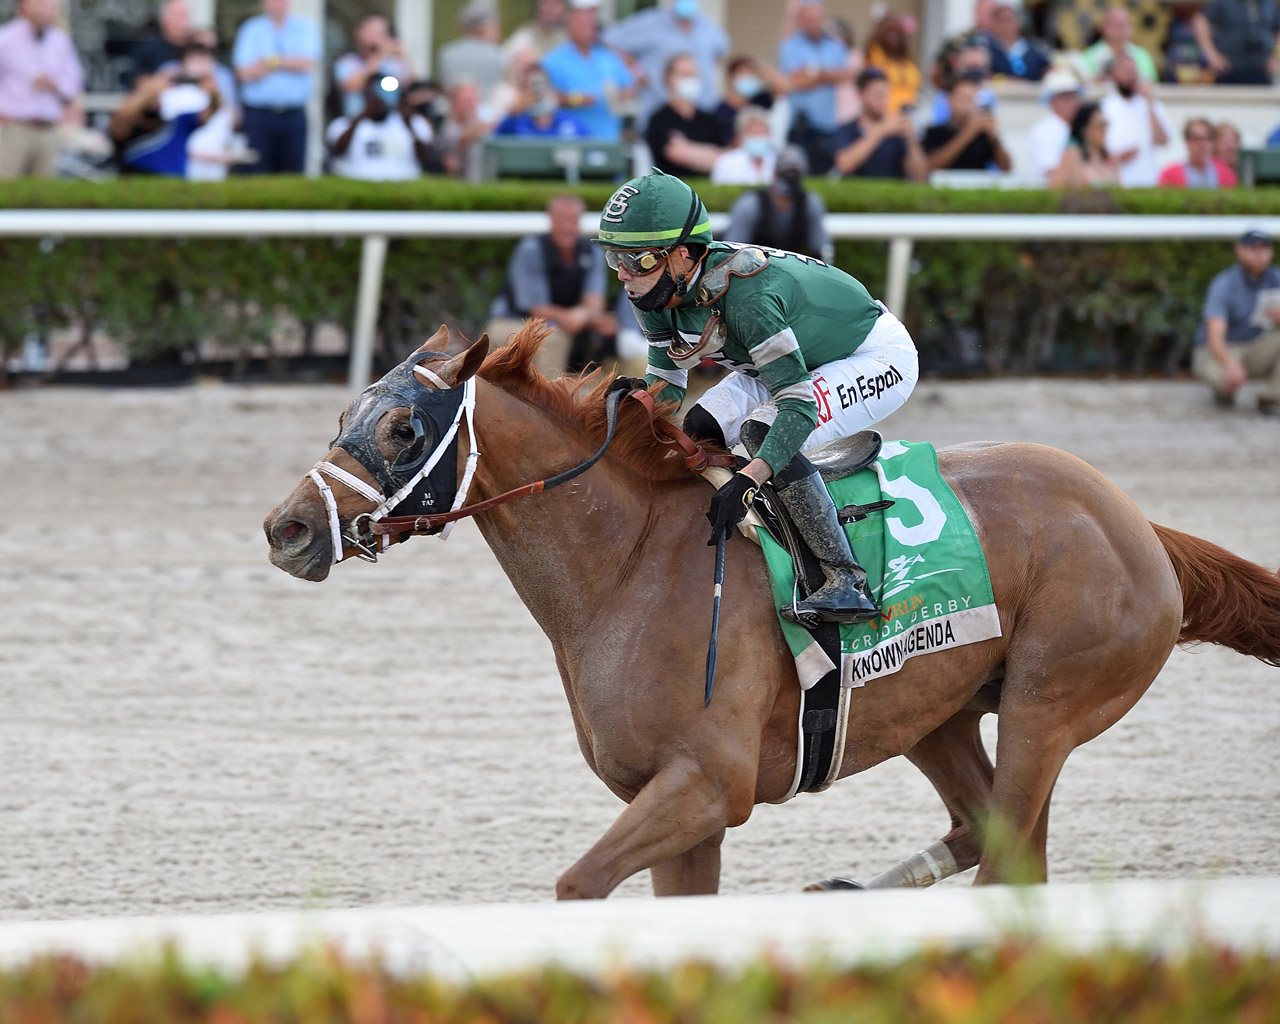 Kentucky Derby Report Known Agenda keeps ascending in Florida Derby